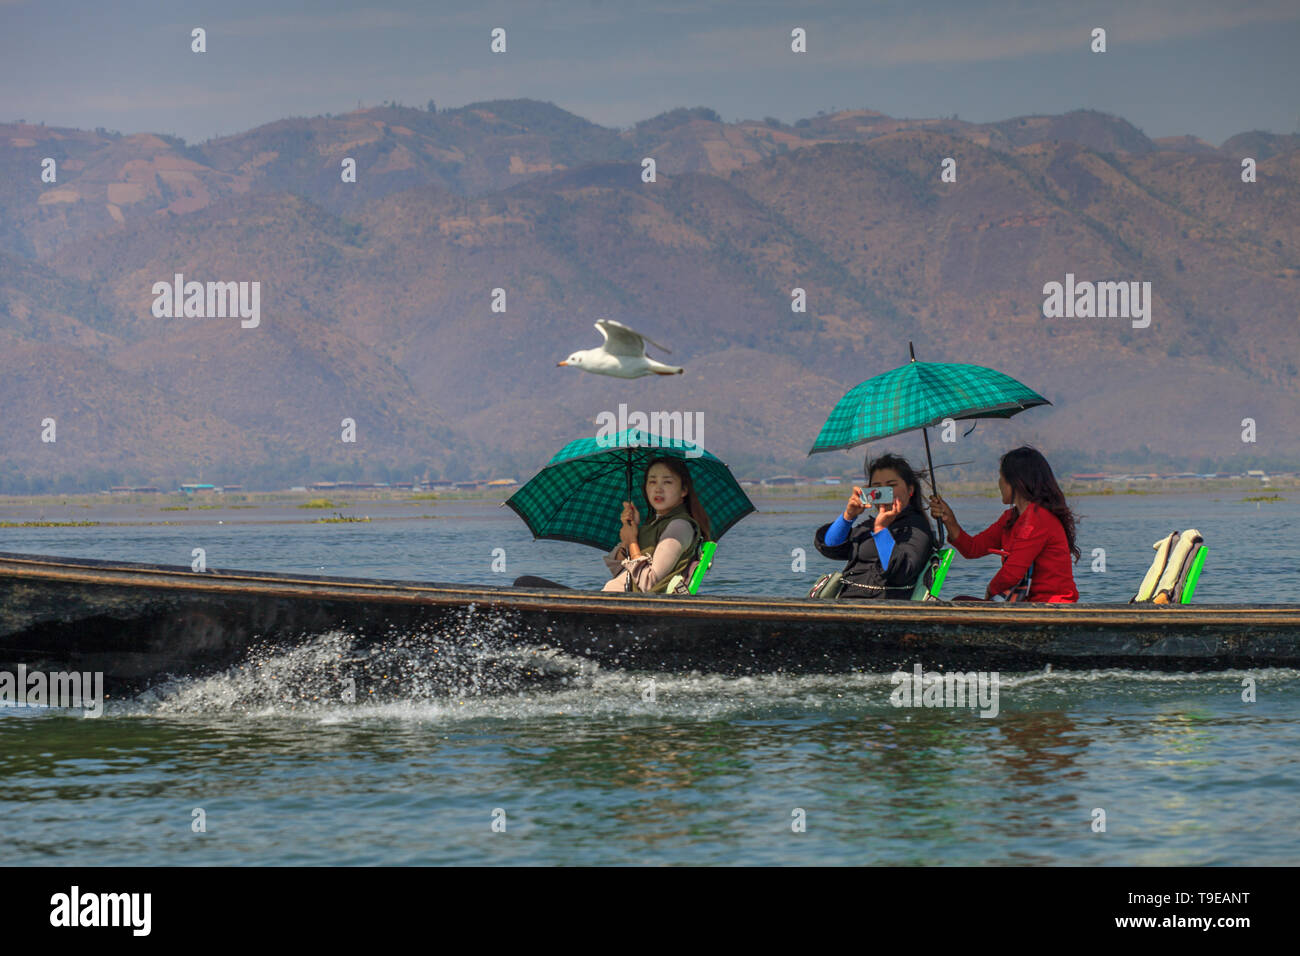 Tourist boat on the Inle lake Stock Photo